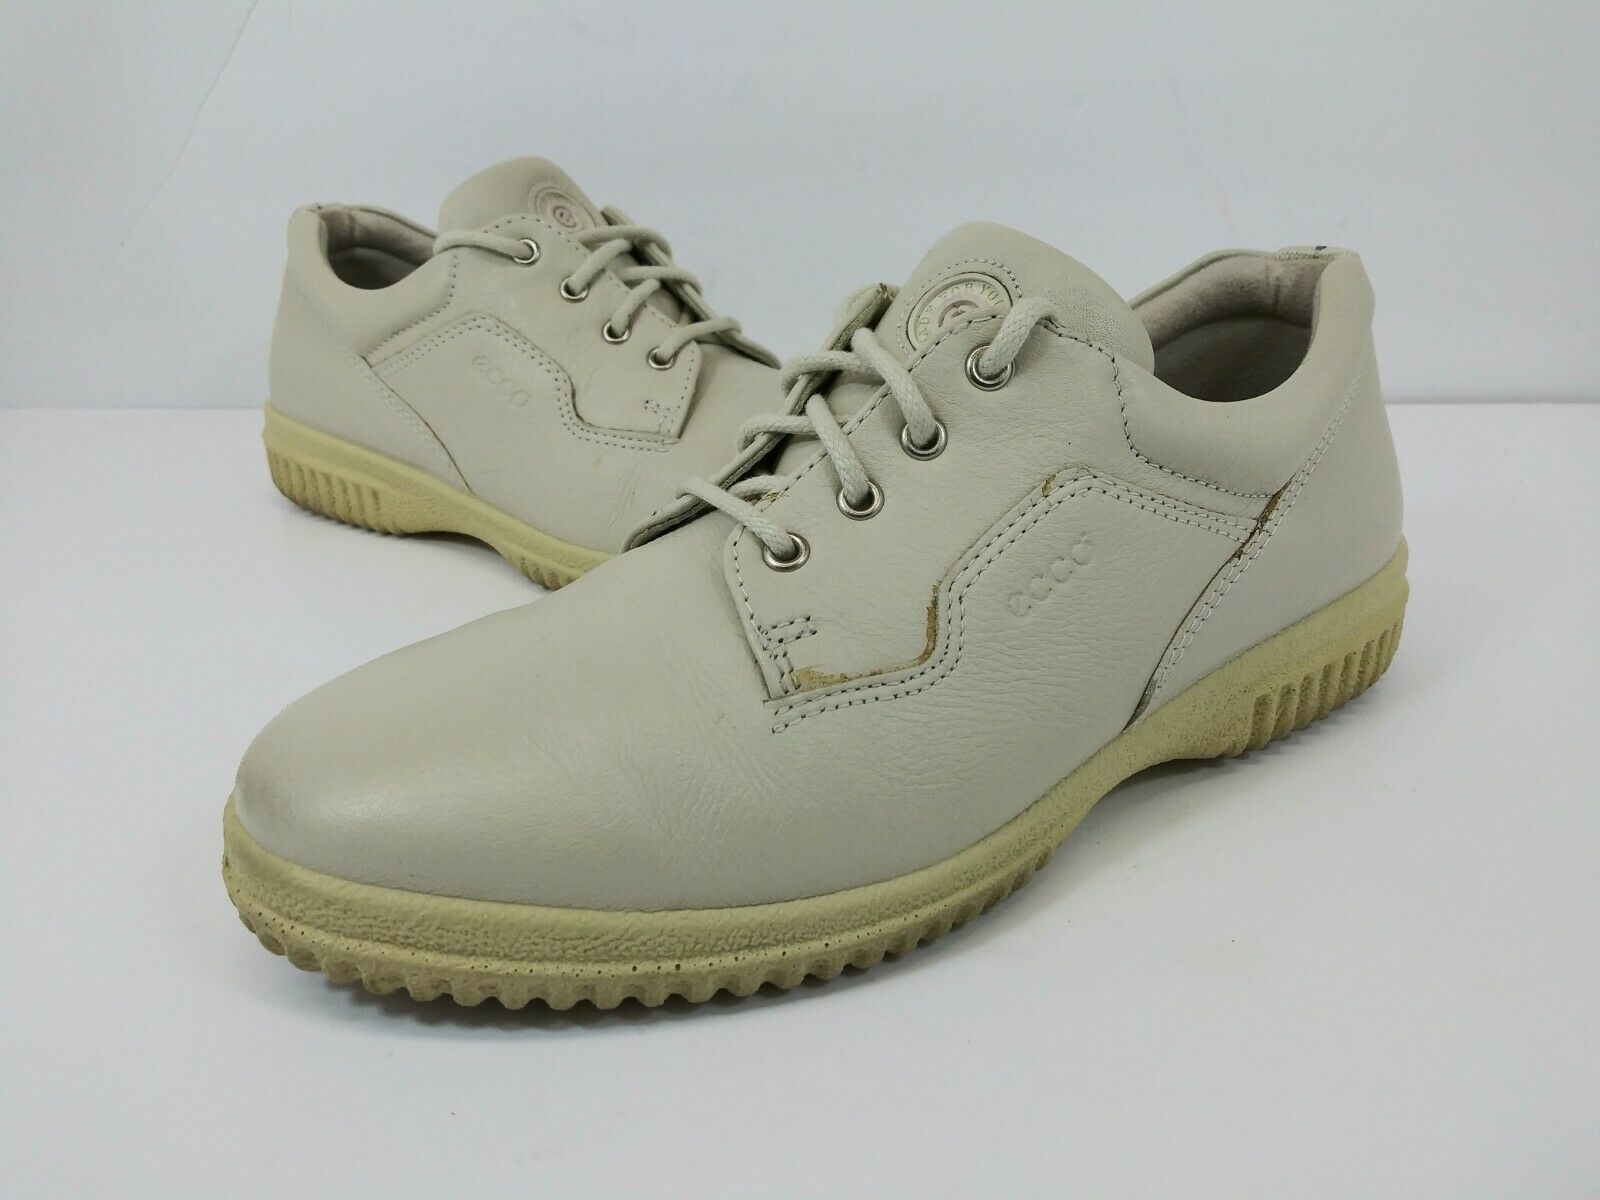 Ecco Womens Comfort Shoes Sz 38 'Made For Young Feet' Cream Leather Fibre System